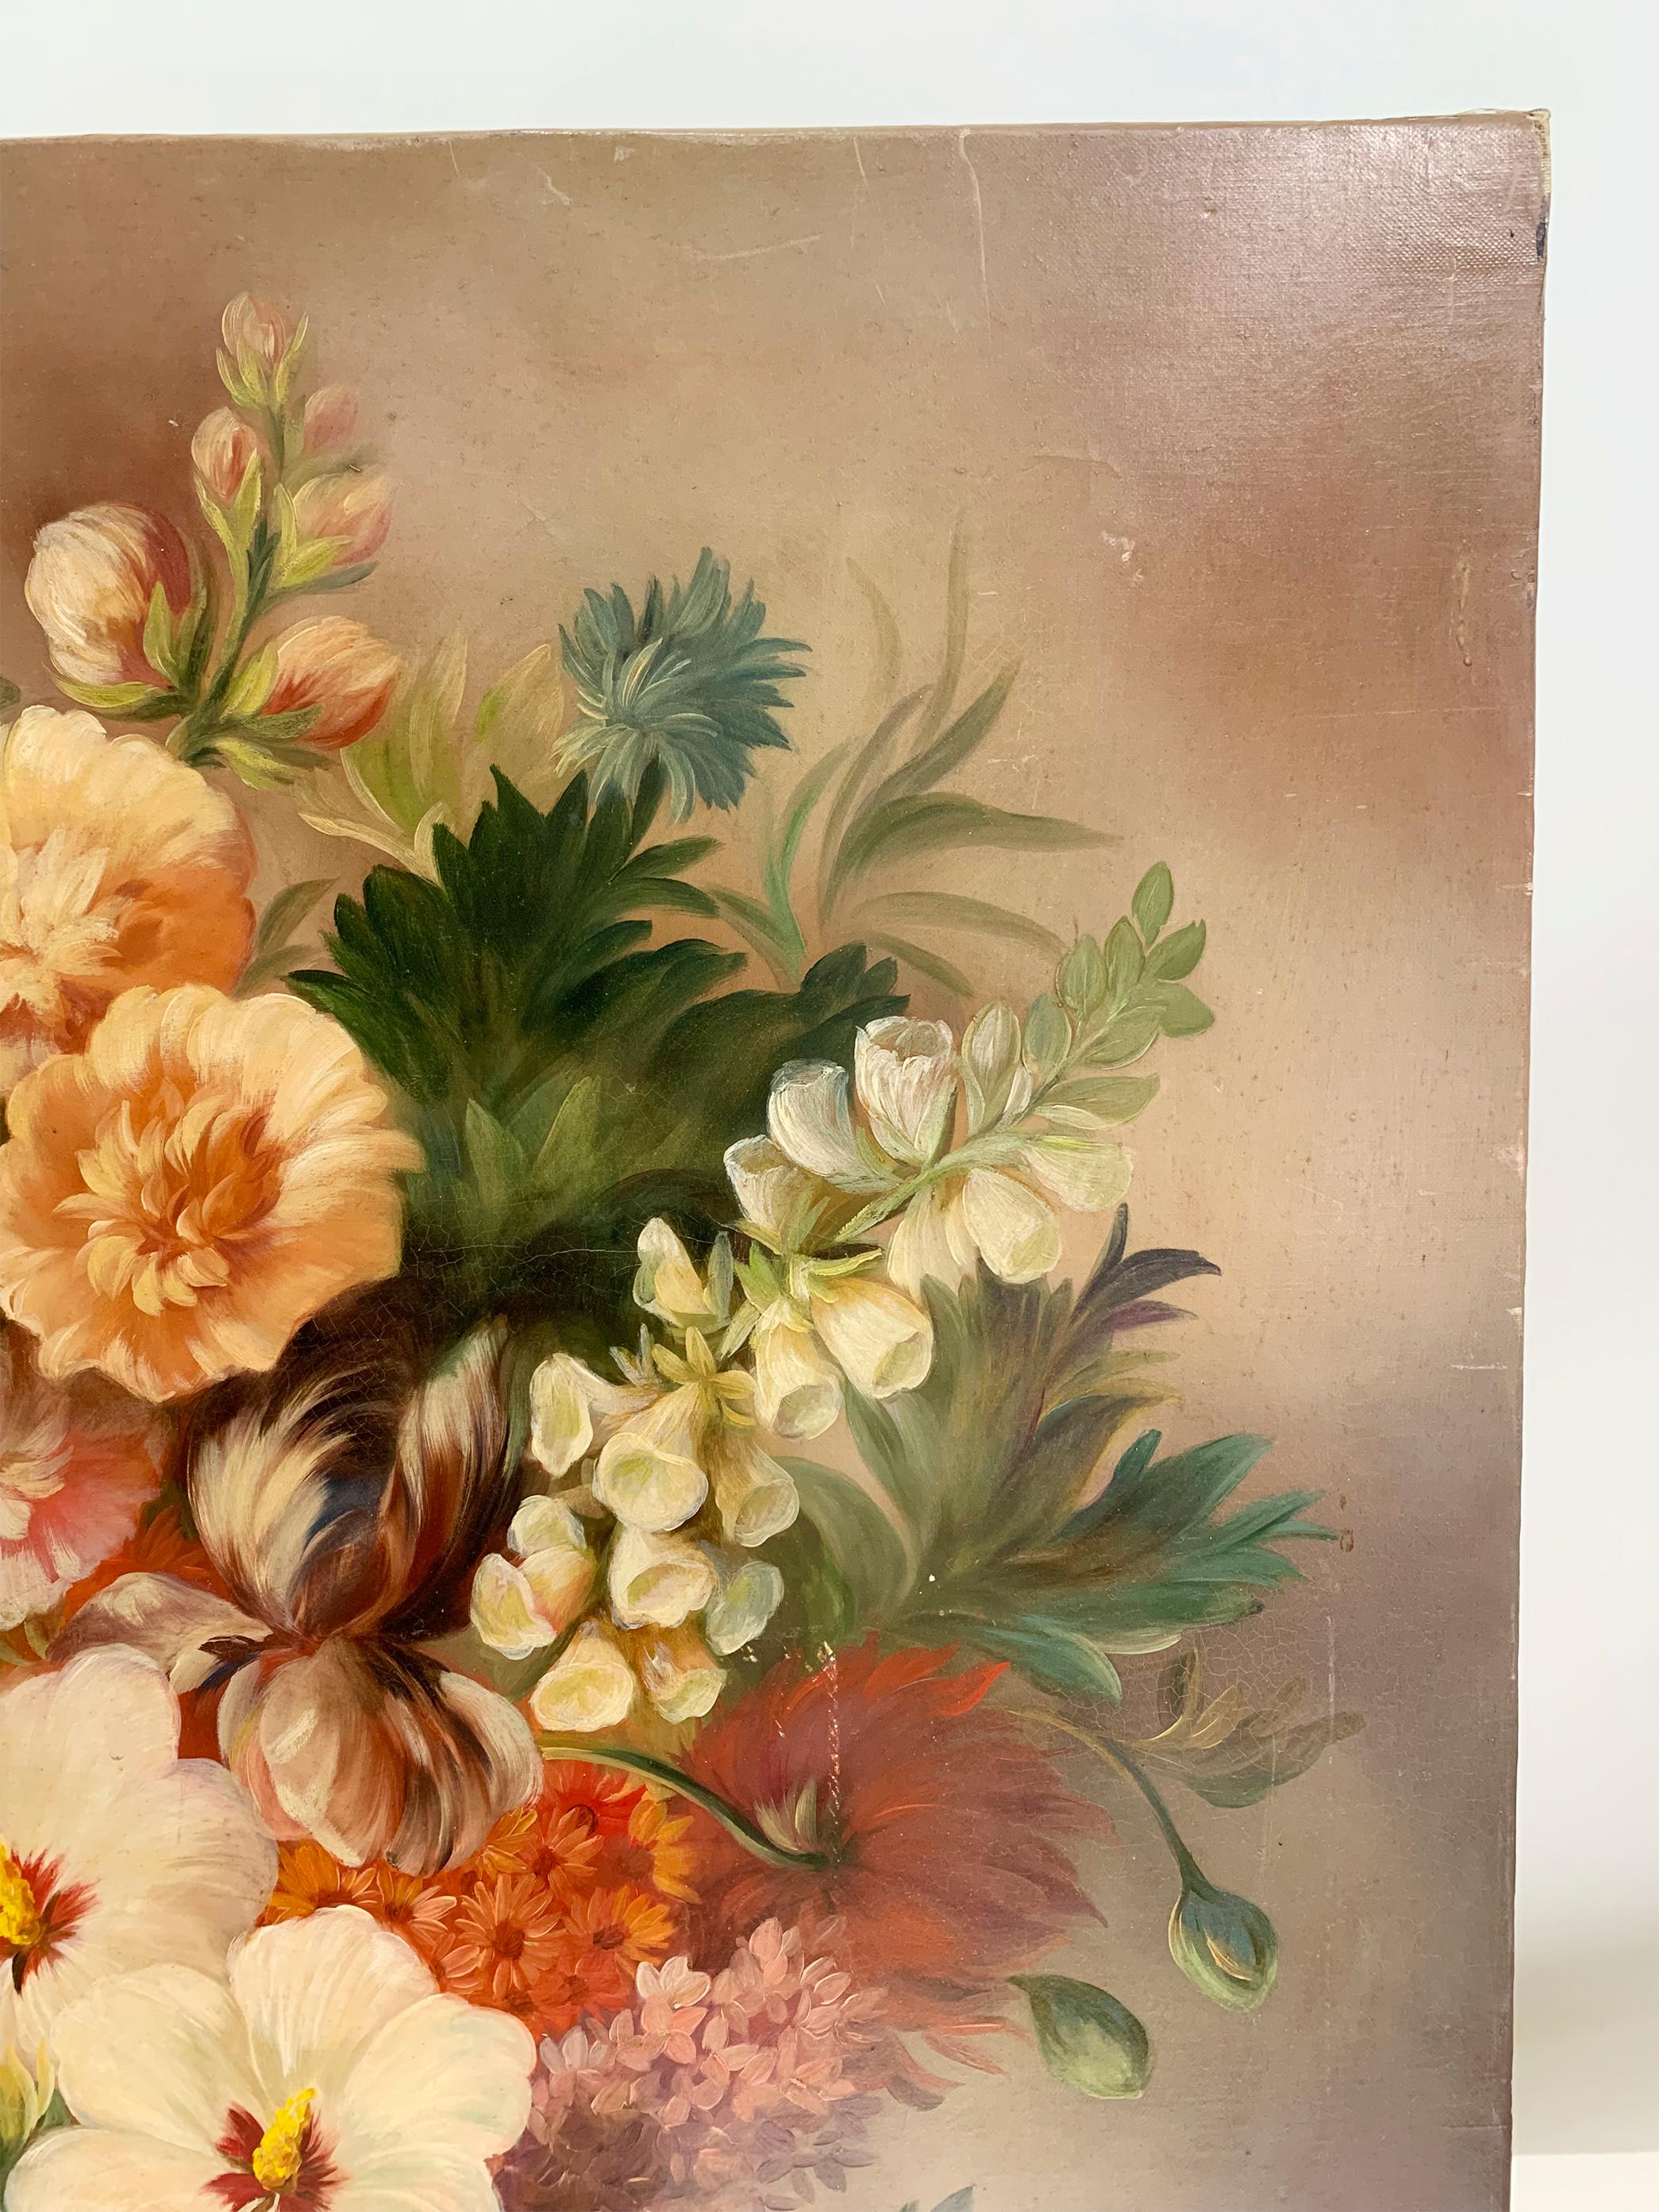 19th Century Floral Still Life Painting - Oil on Canvas - Signed Anne Maurin For Sale 1